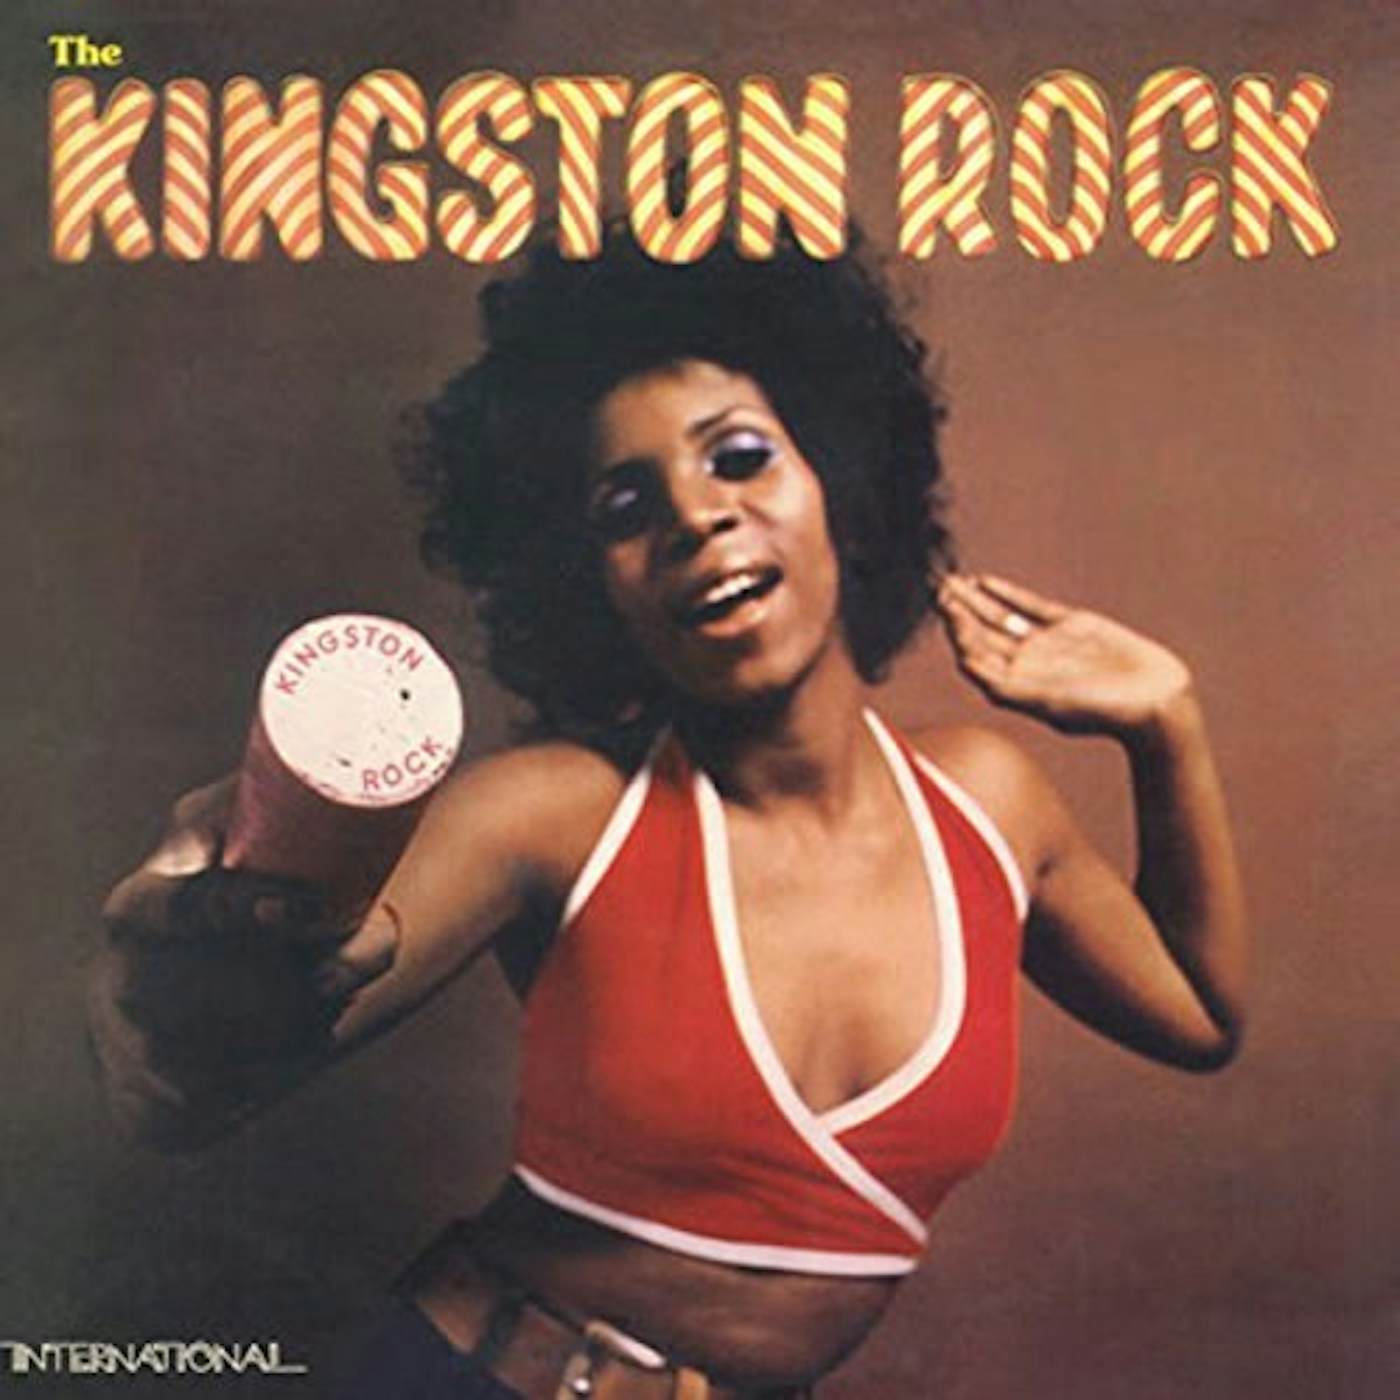 KINGSTON ROCK (EARTH MUST BE HELL) / VARIOUS Vinyl Record - UK Release